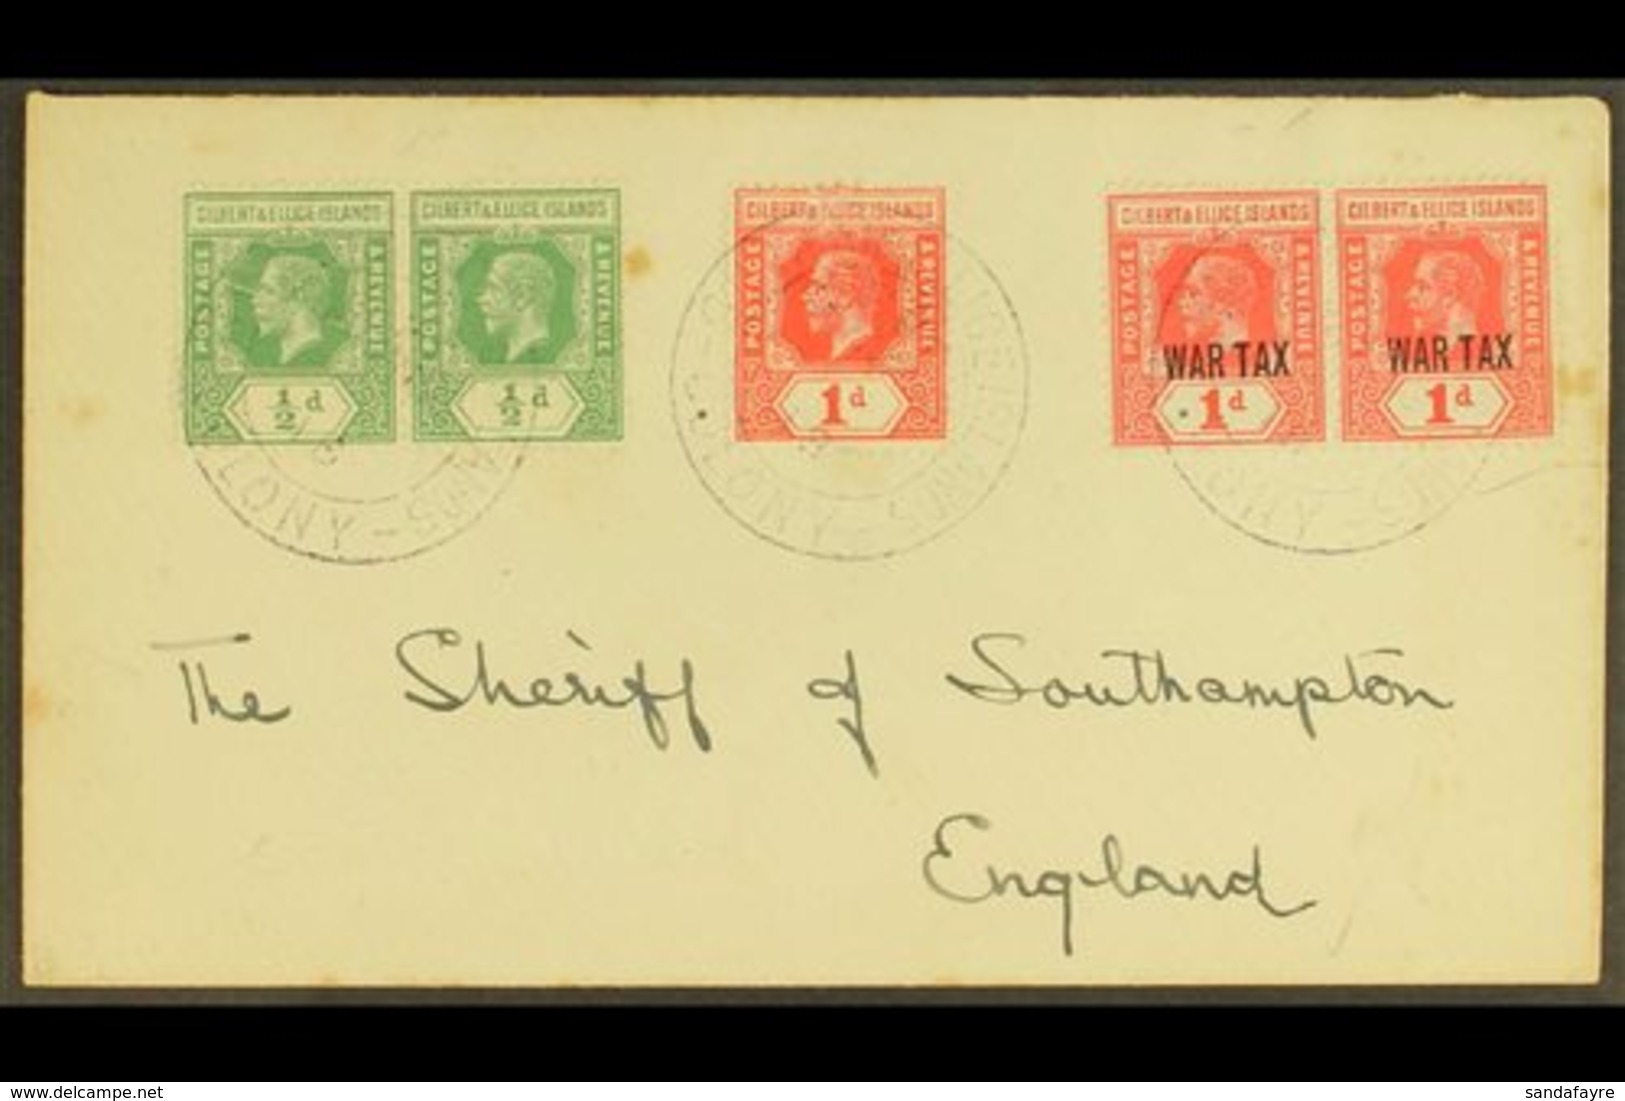 1918 (Sept) A Neat Envelope To The Sheriff Of Southampton, Bearing KGV ½d Pair And 1d, War Tax 1d Pair, Tied GPO Cds's.  - Îles Gilbert Et Ellice (...-1979)